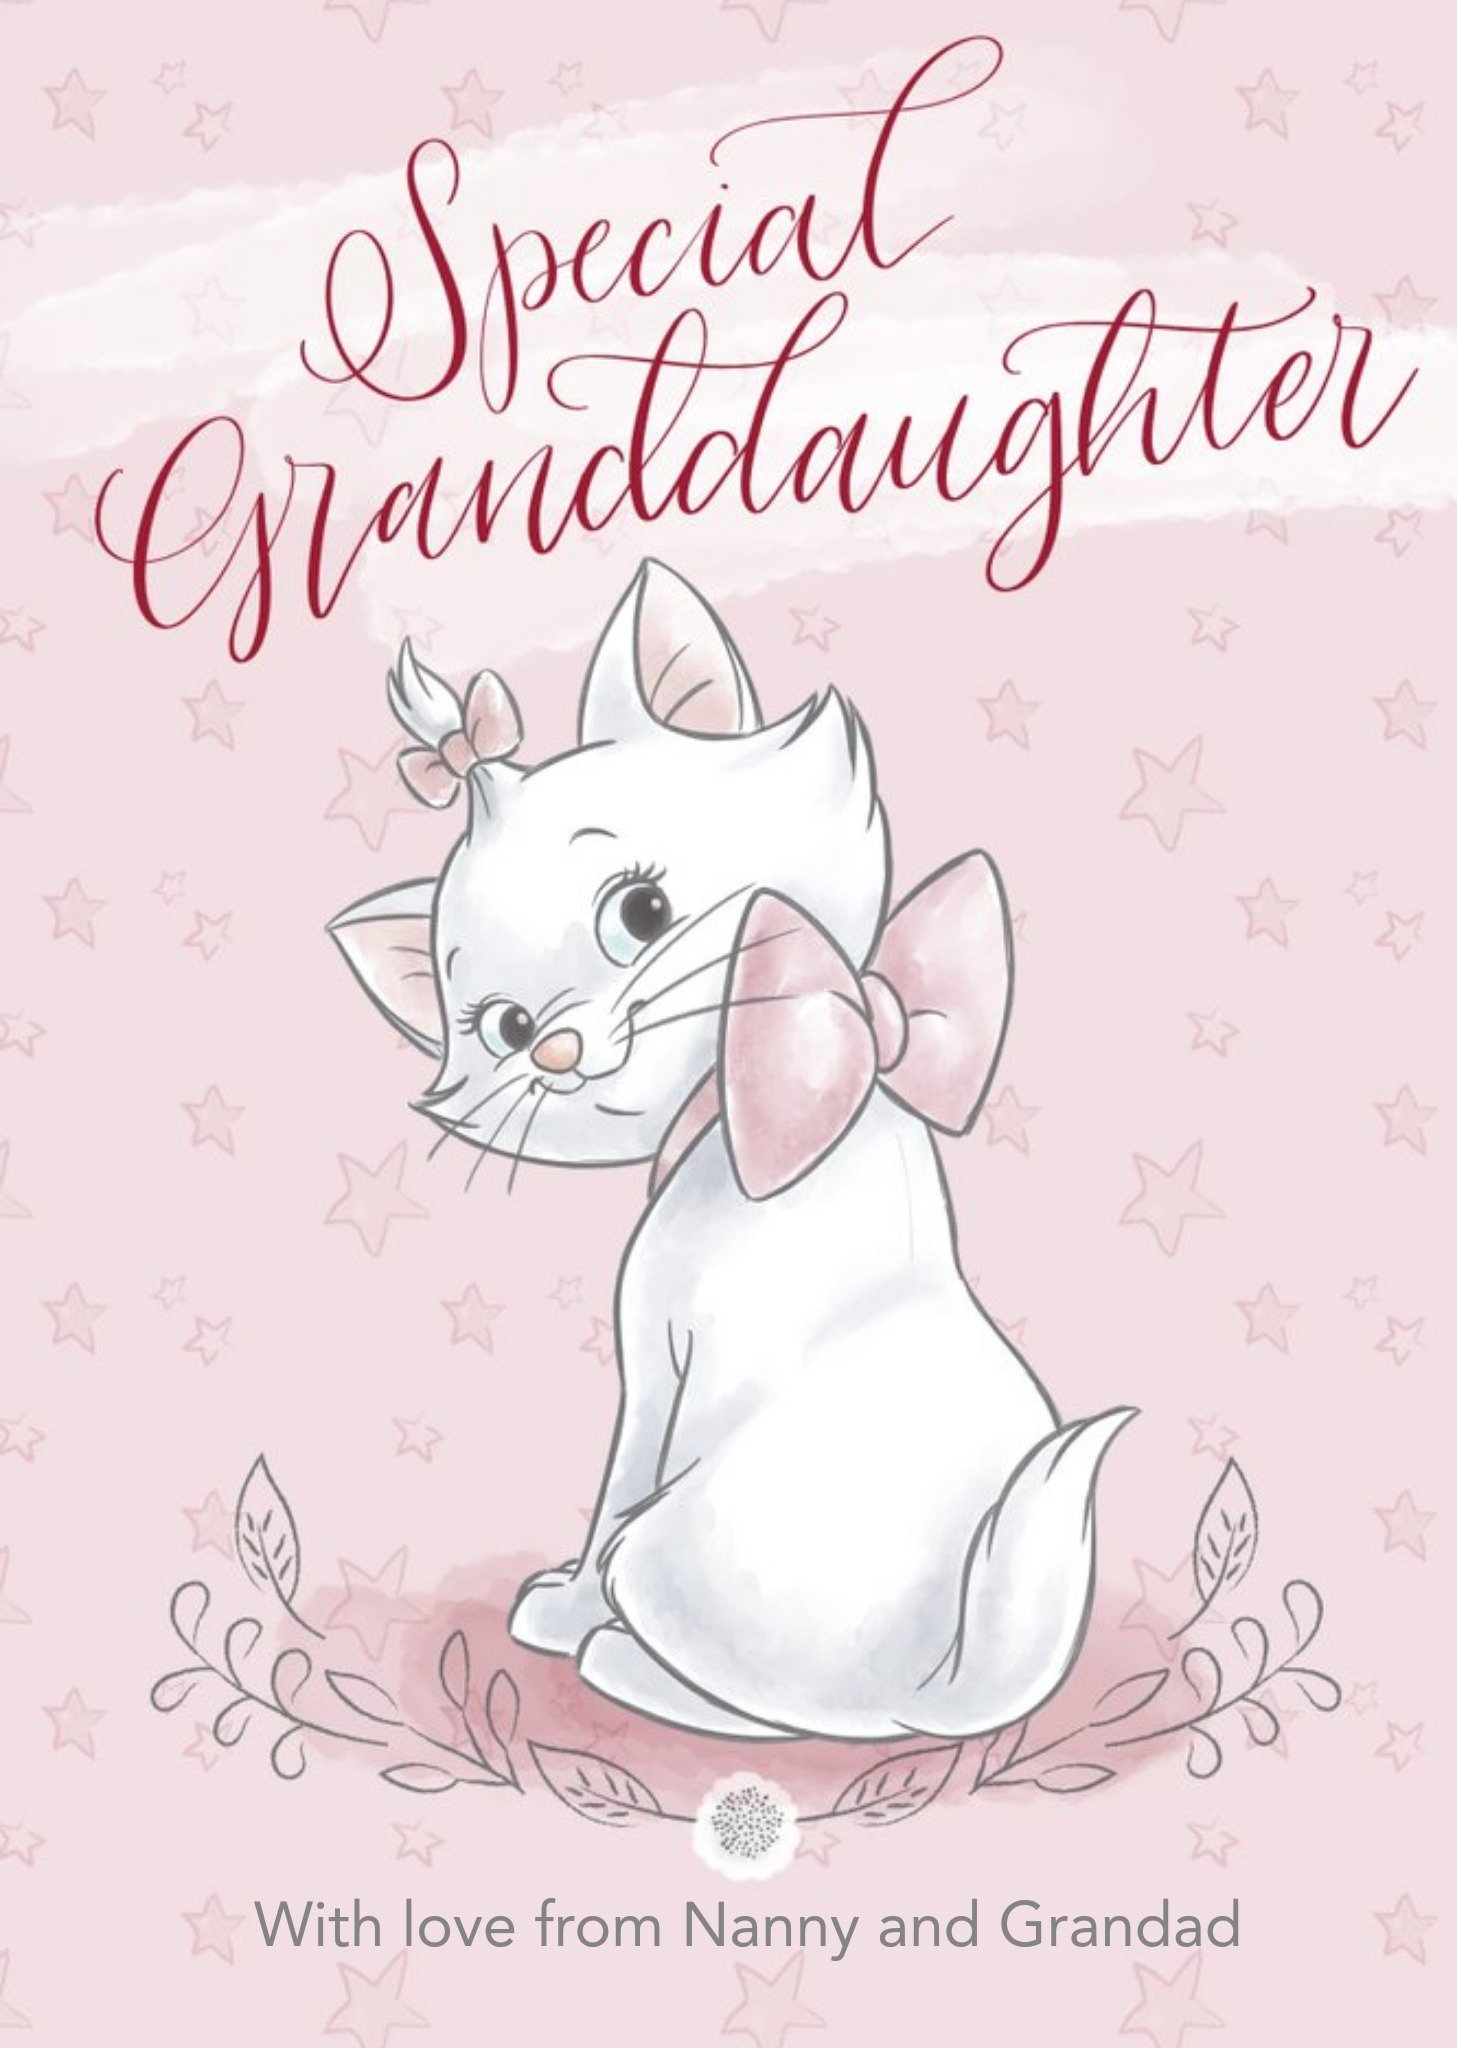 Other Disney Aristocats - Cute Granddaughter Birthday Card, Large